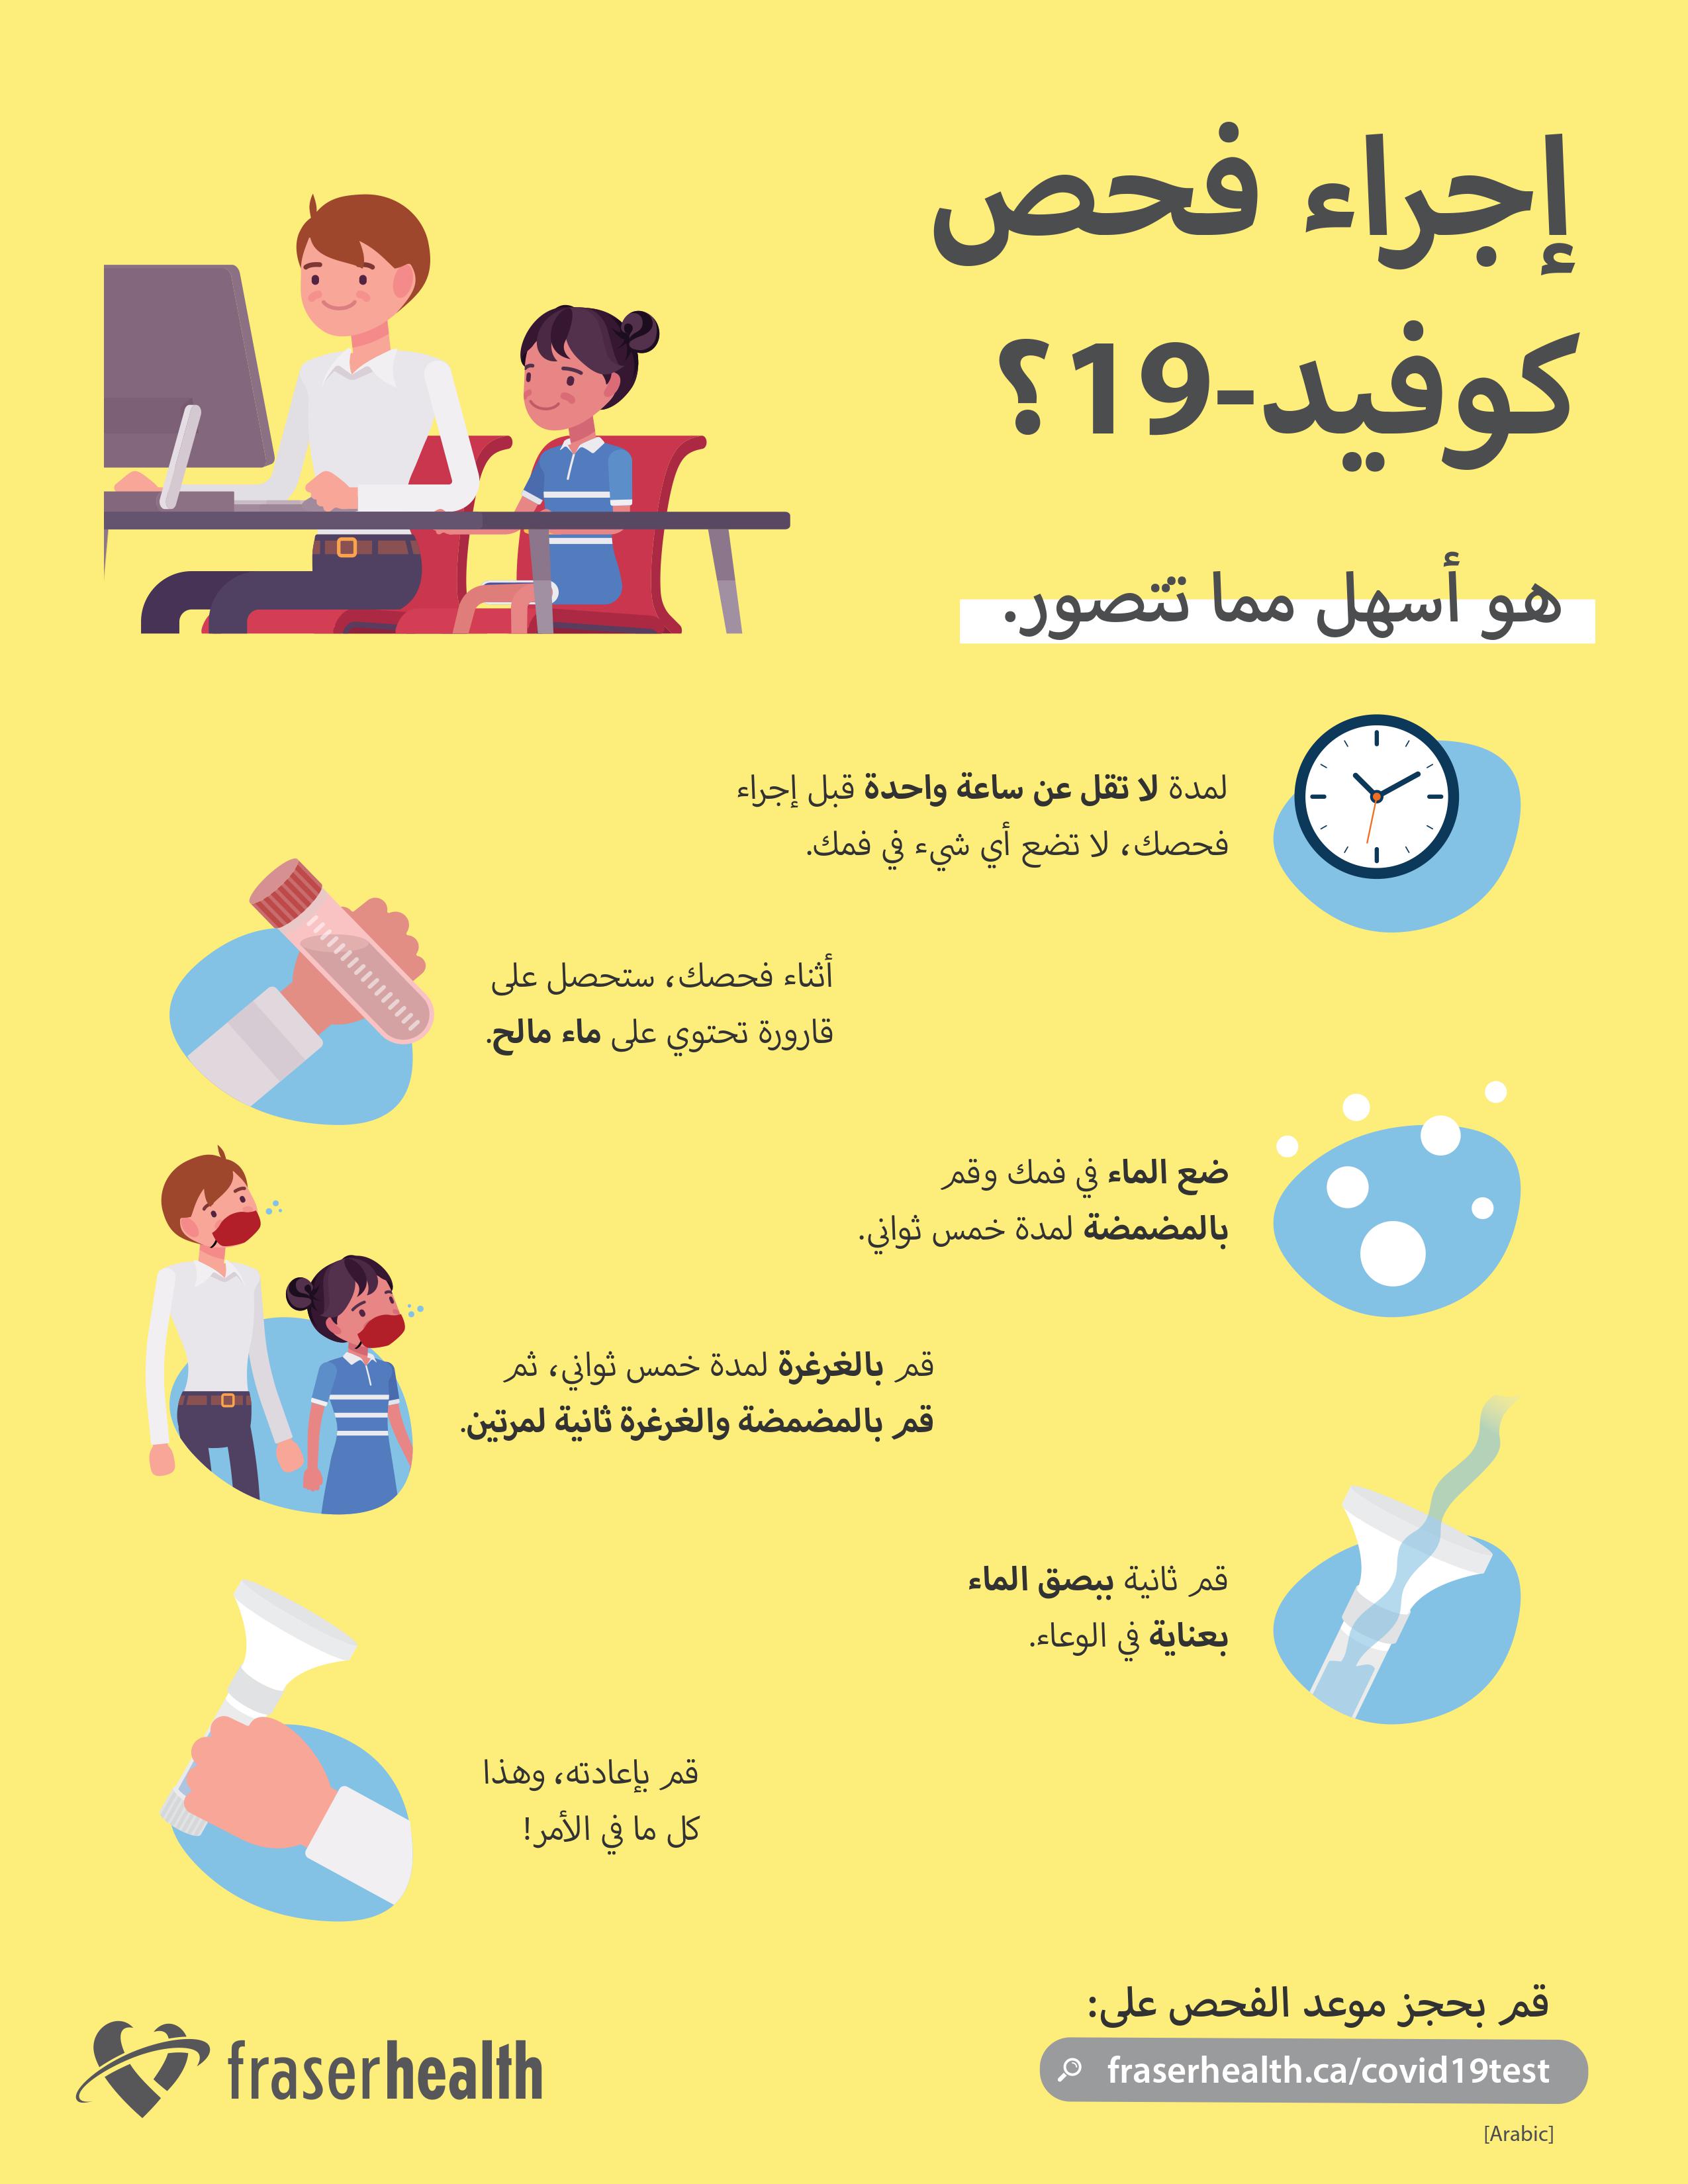 Instructions on how to prepare for your COVID-19 test in Arabic